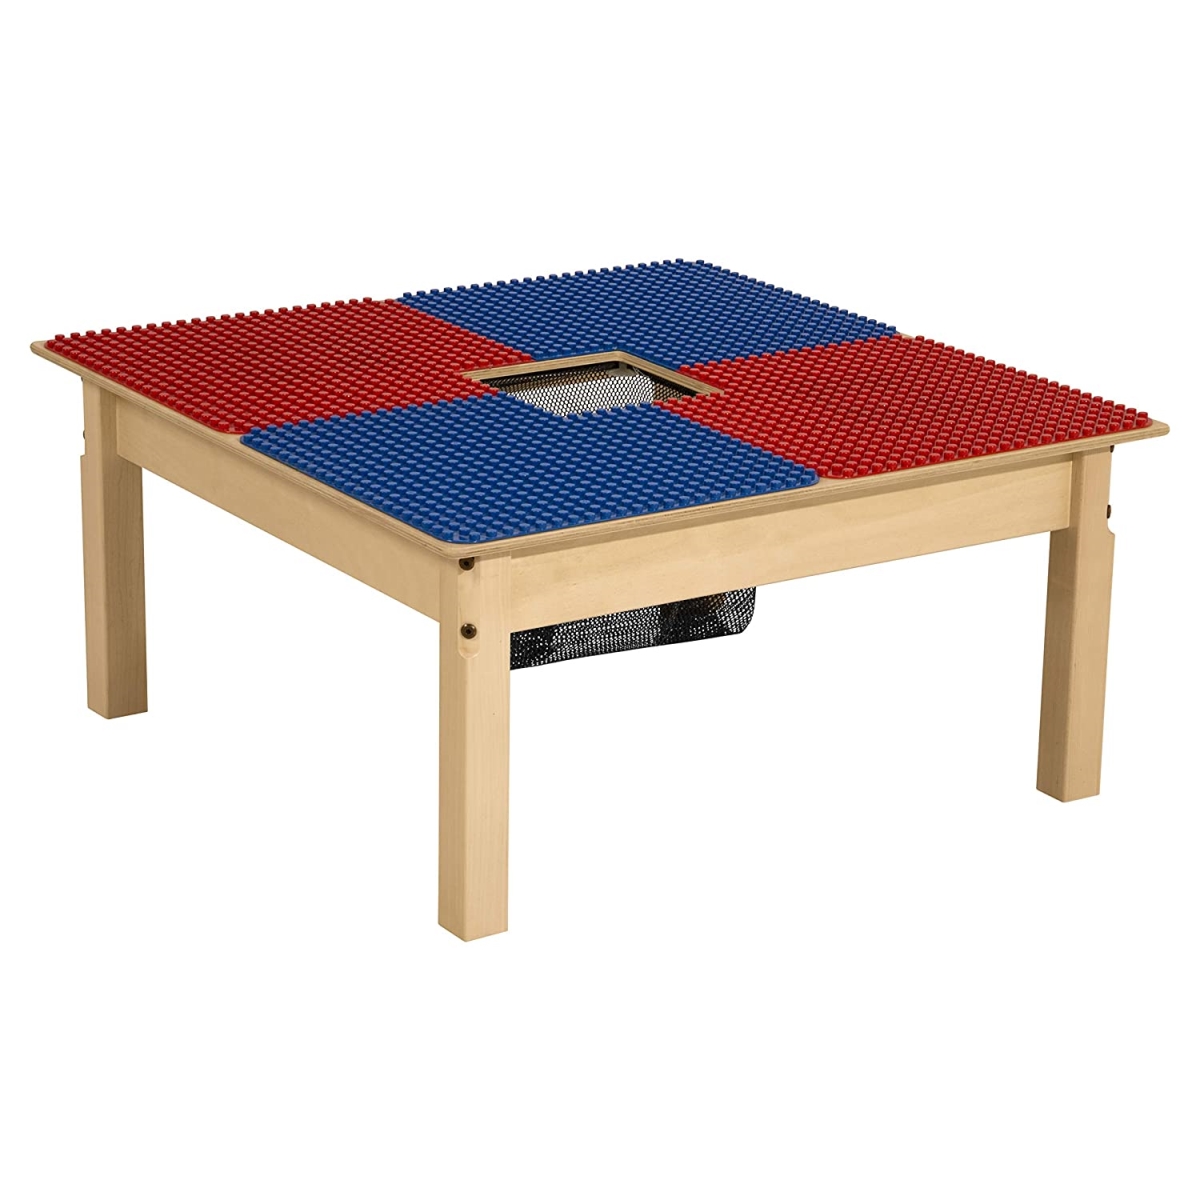 Tp3131pgna1829-br 18-29 In. Duplo Compatible Table With Adjustable Legs, Blue & Red - Square